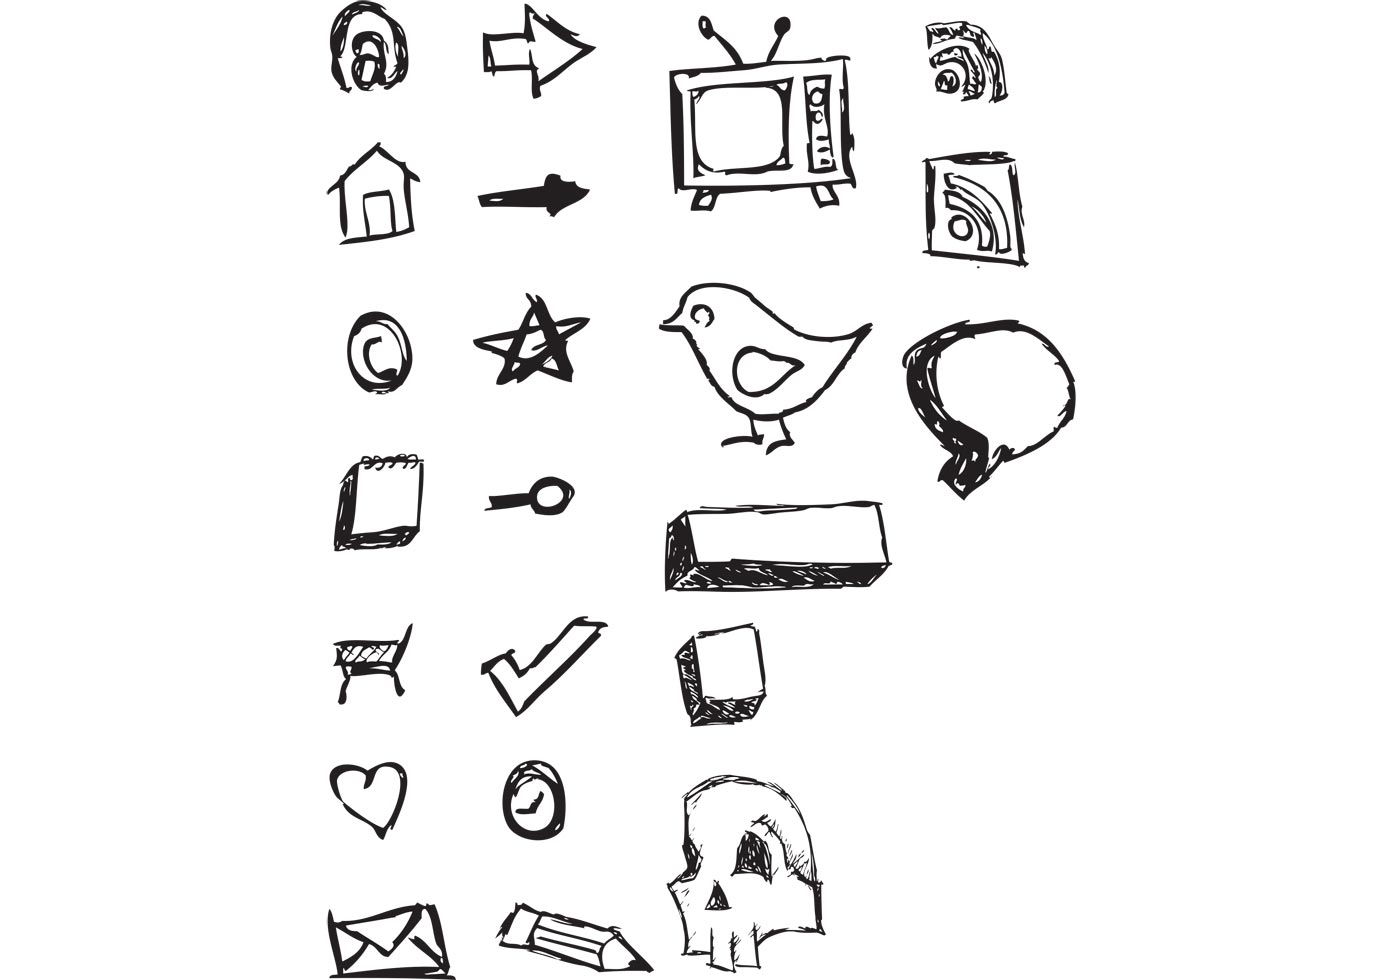 Hand Drawn Vector Icons - Download Free Vector Art, Stock Graphics & Images